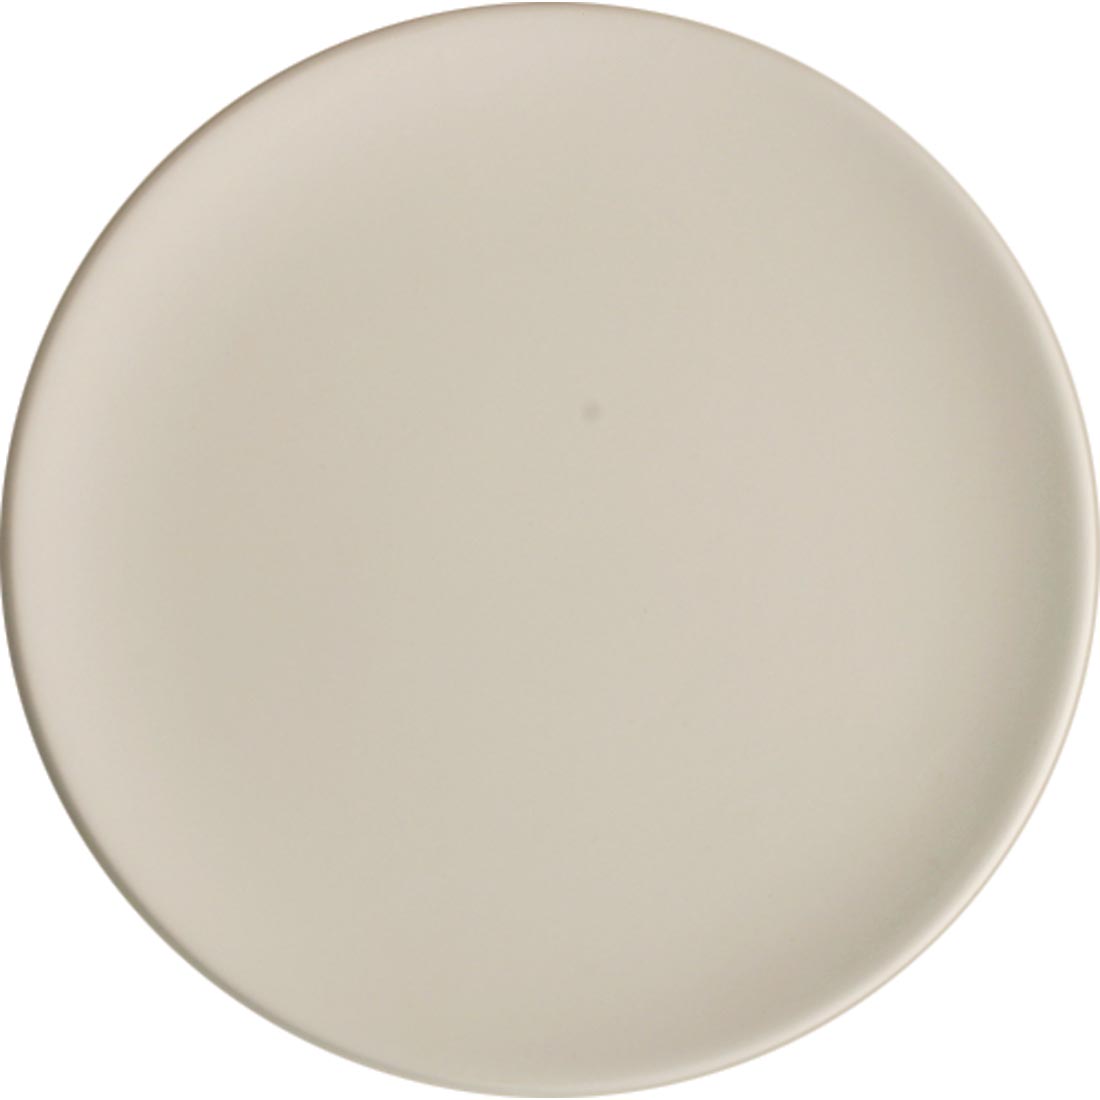 Mayco Bisque Salad Plate